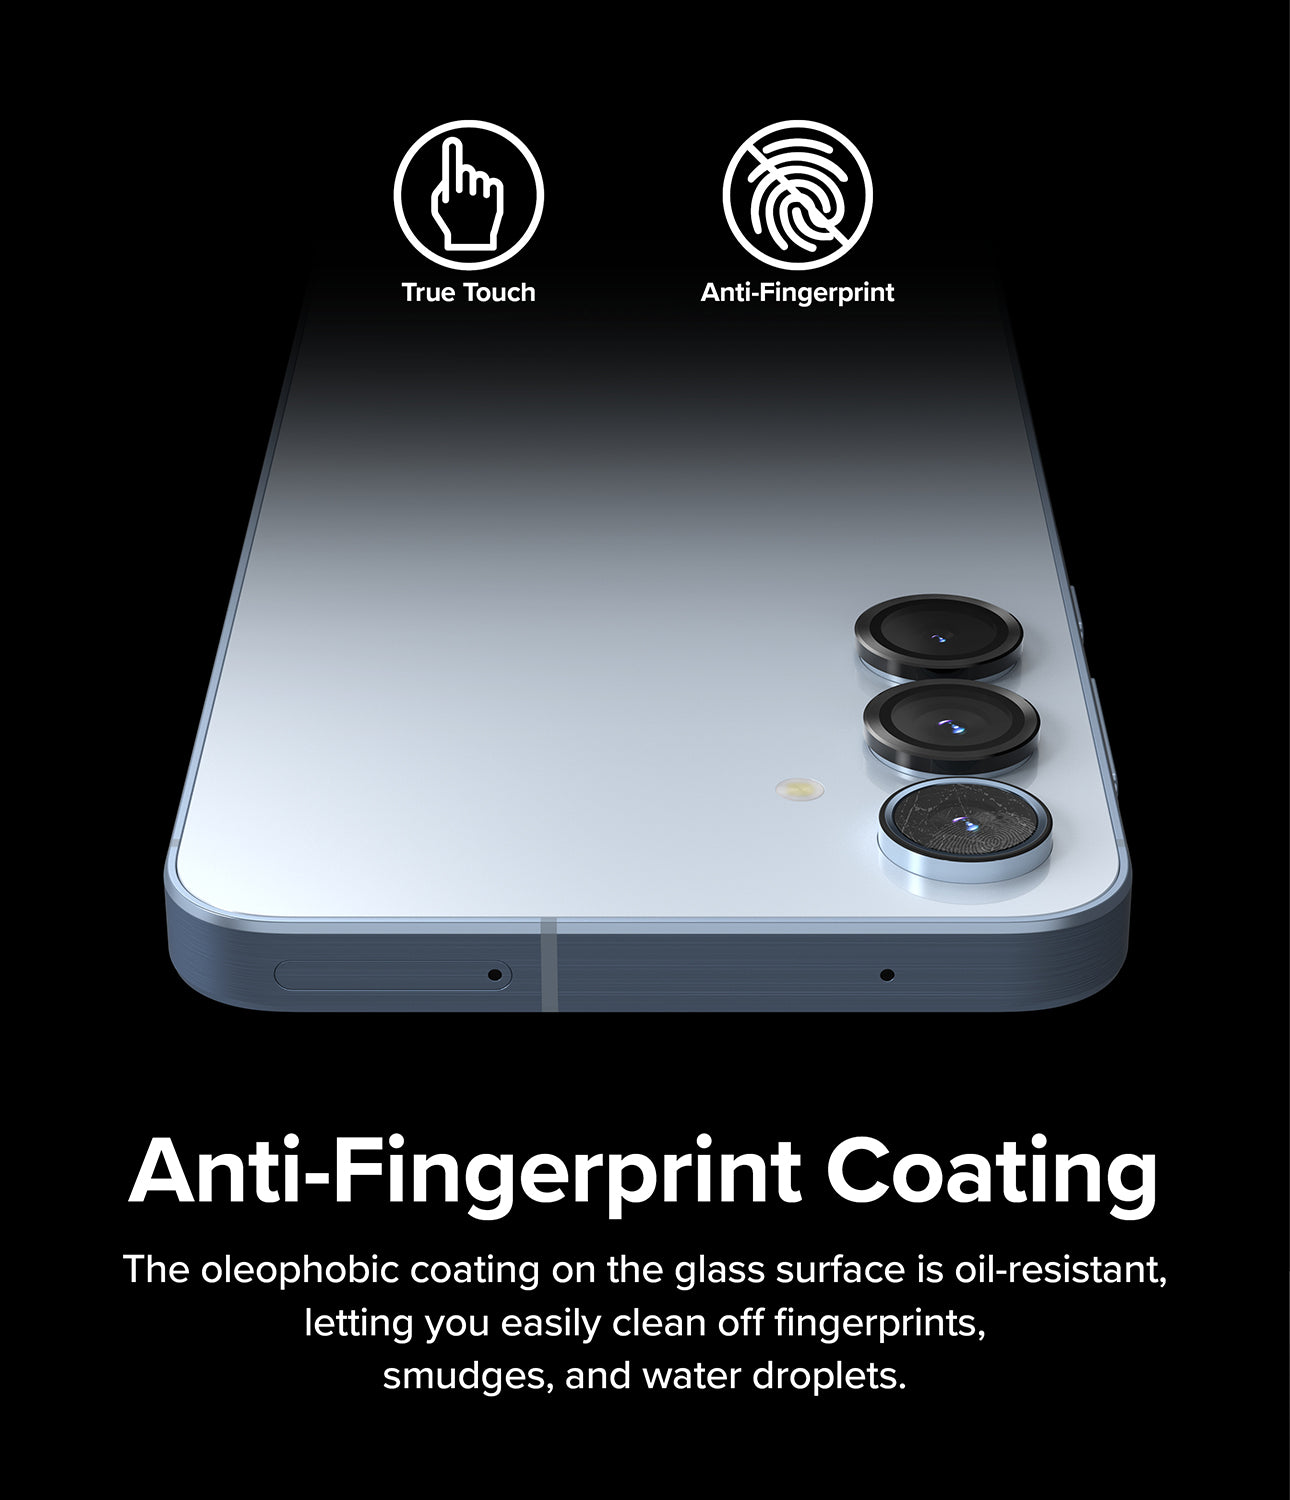 Galaxy A55 / A35 Camera Lens Frame Glass Protector - Anti-Fingerprint Coating. The oleophobic coating on the glass surface is oil-resistant, letting your easily clean off fingerprints, smudges, and water droplets.